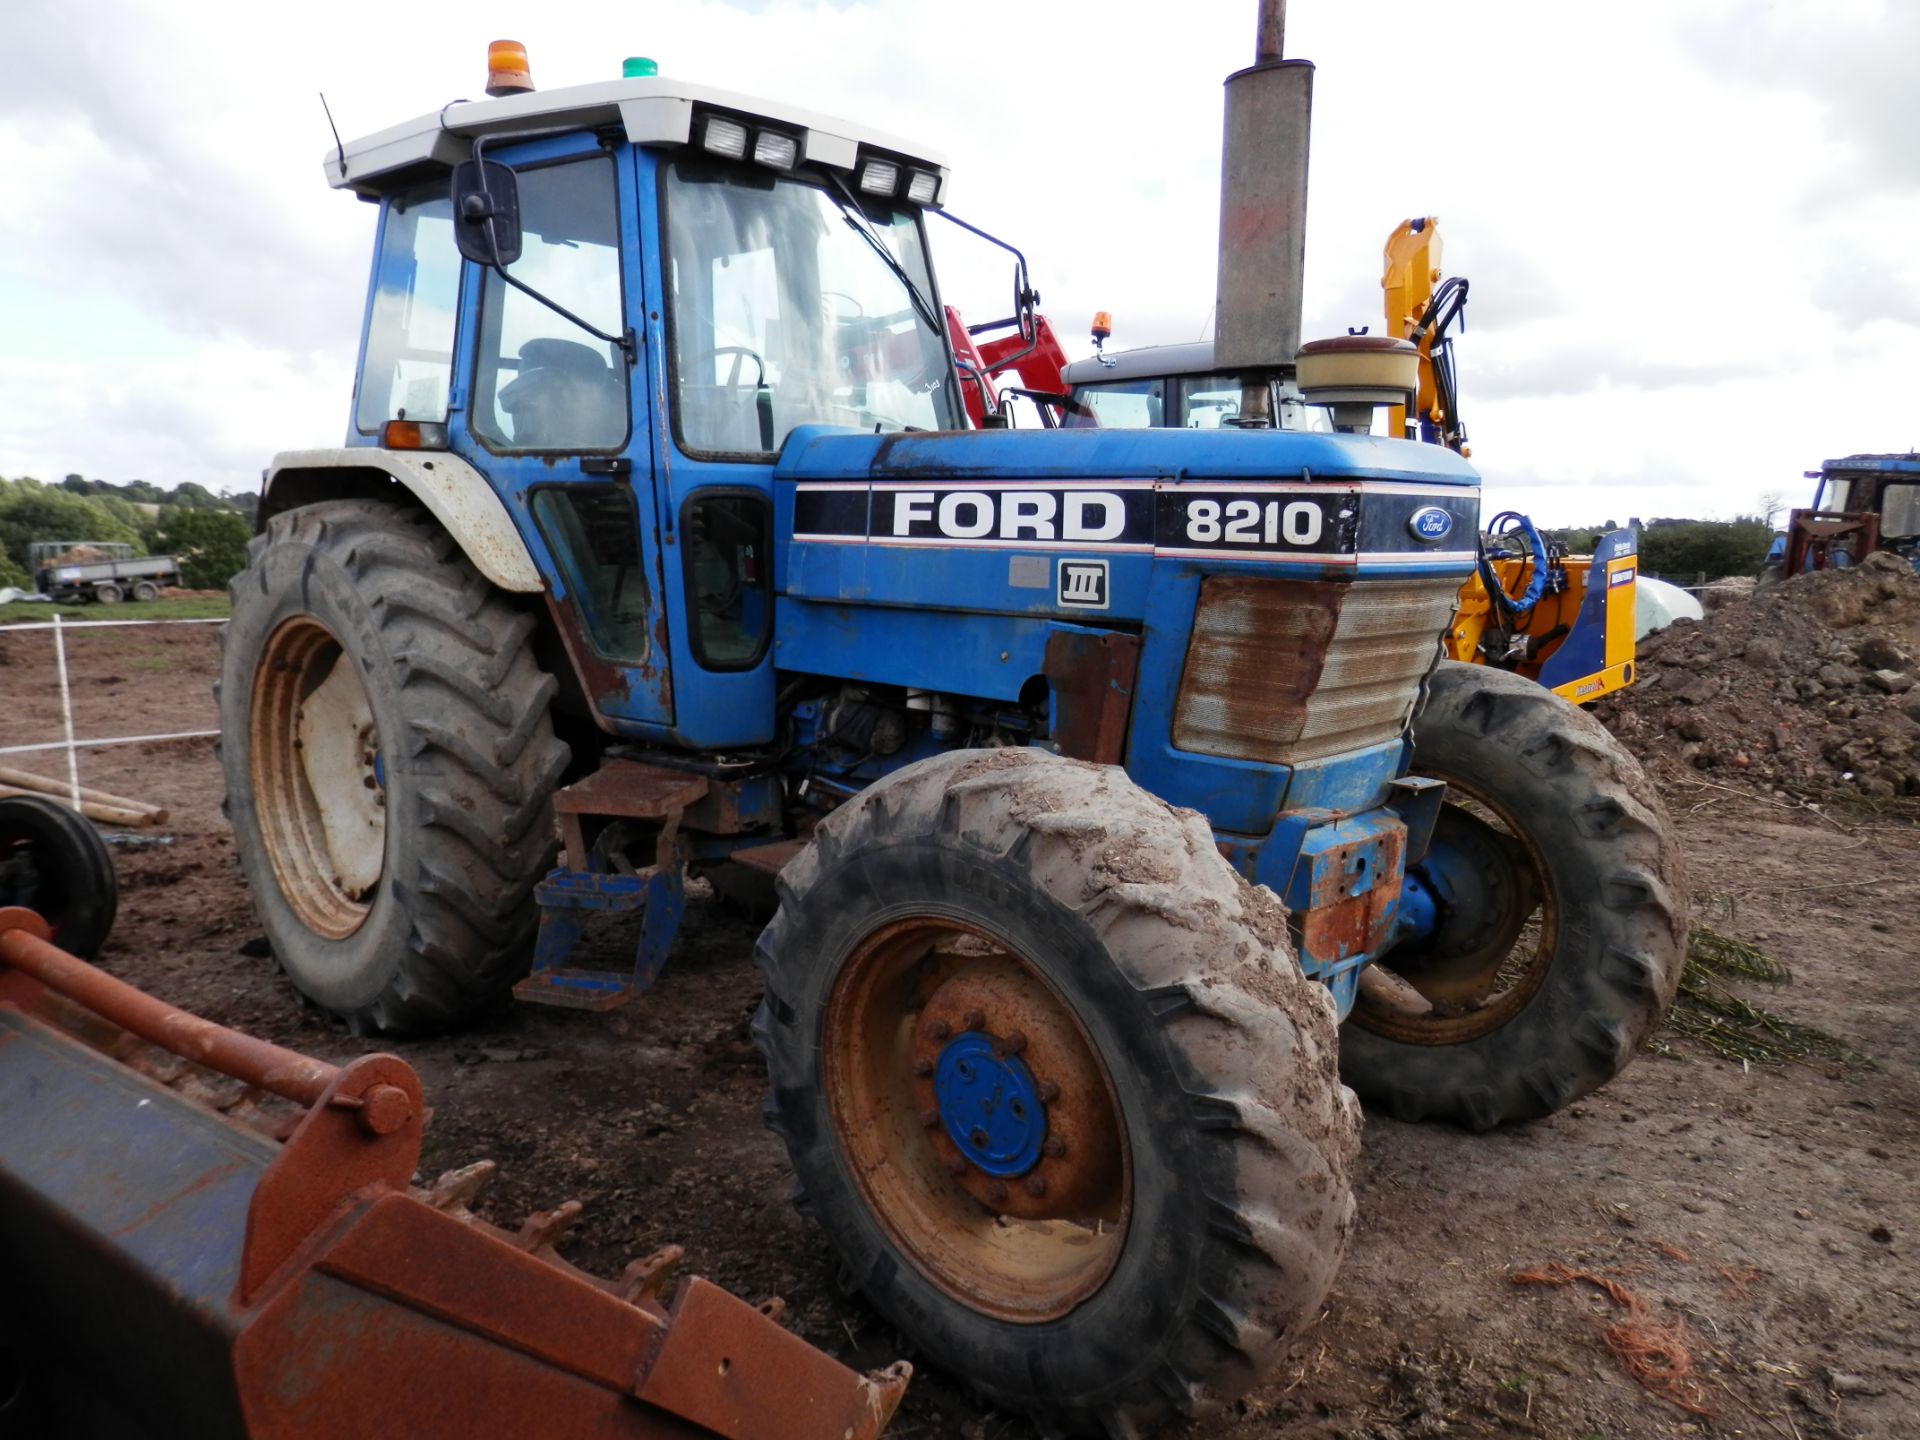 1990/H REG FORD 8210 DIESEL TRACTOR, RUNNING & WORKING. 9409 WORKING HOURS. - Image 12 of 12